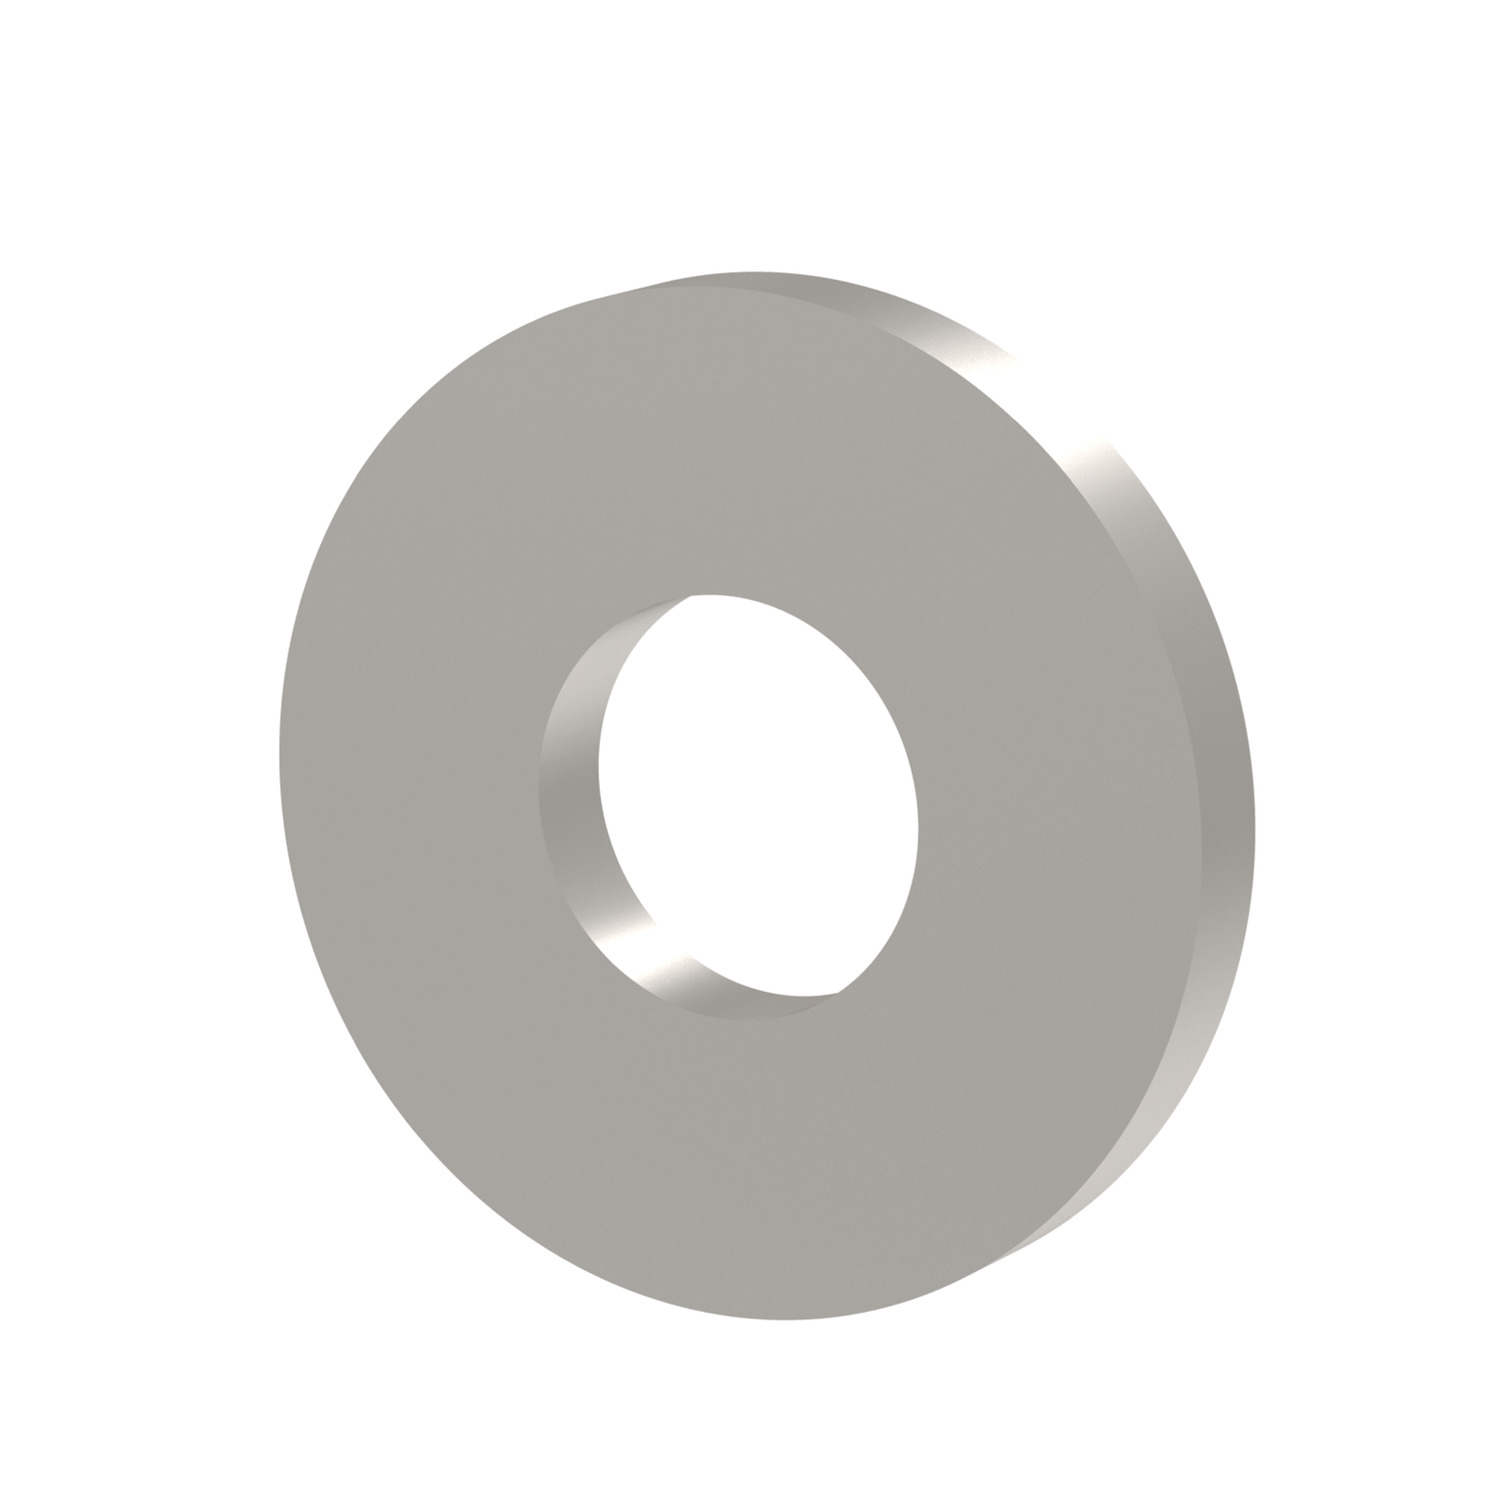 Penny Washers Flat washers with large out diameters, ideal for use connecting to holes made larger by wear or spreading load across their larger surface area.